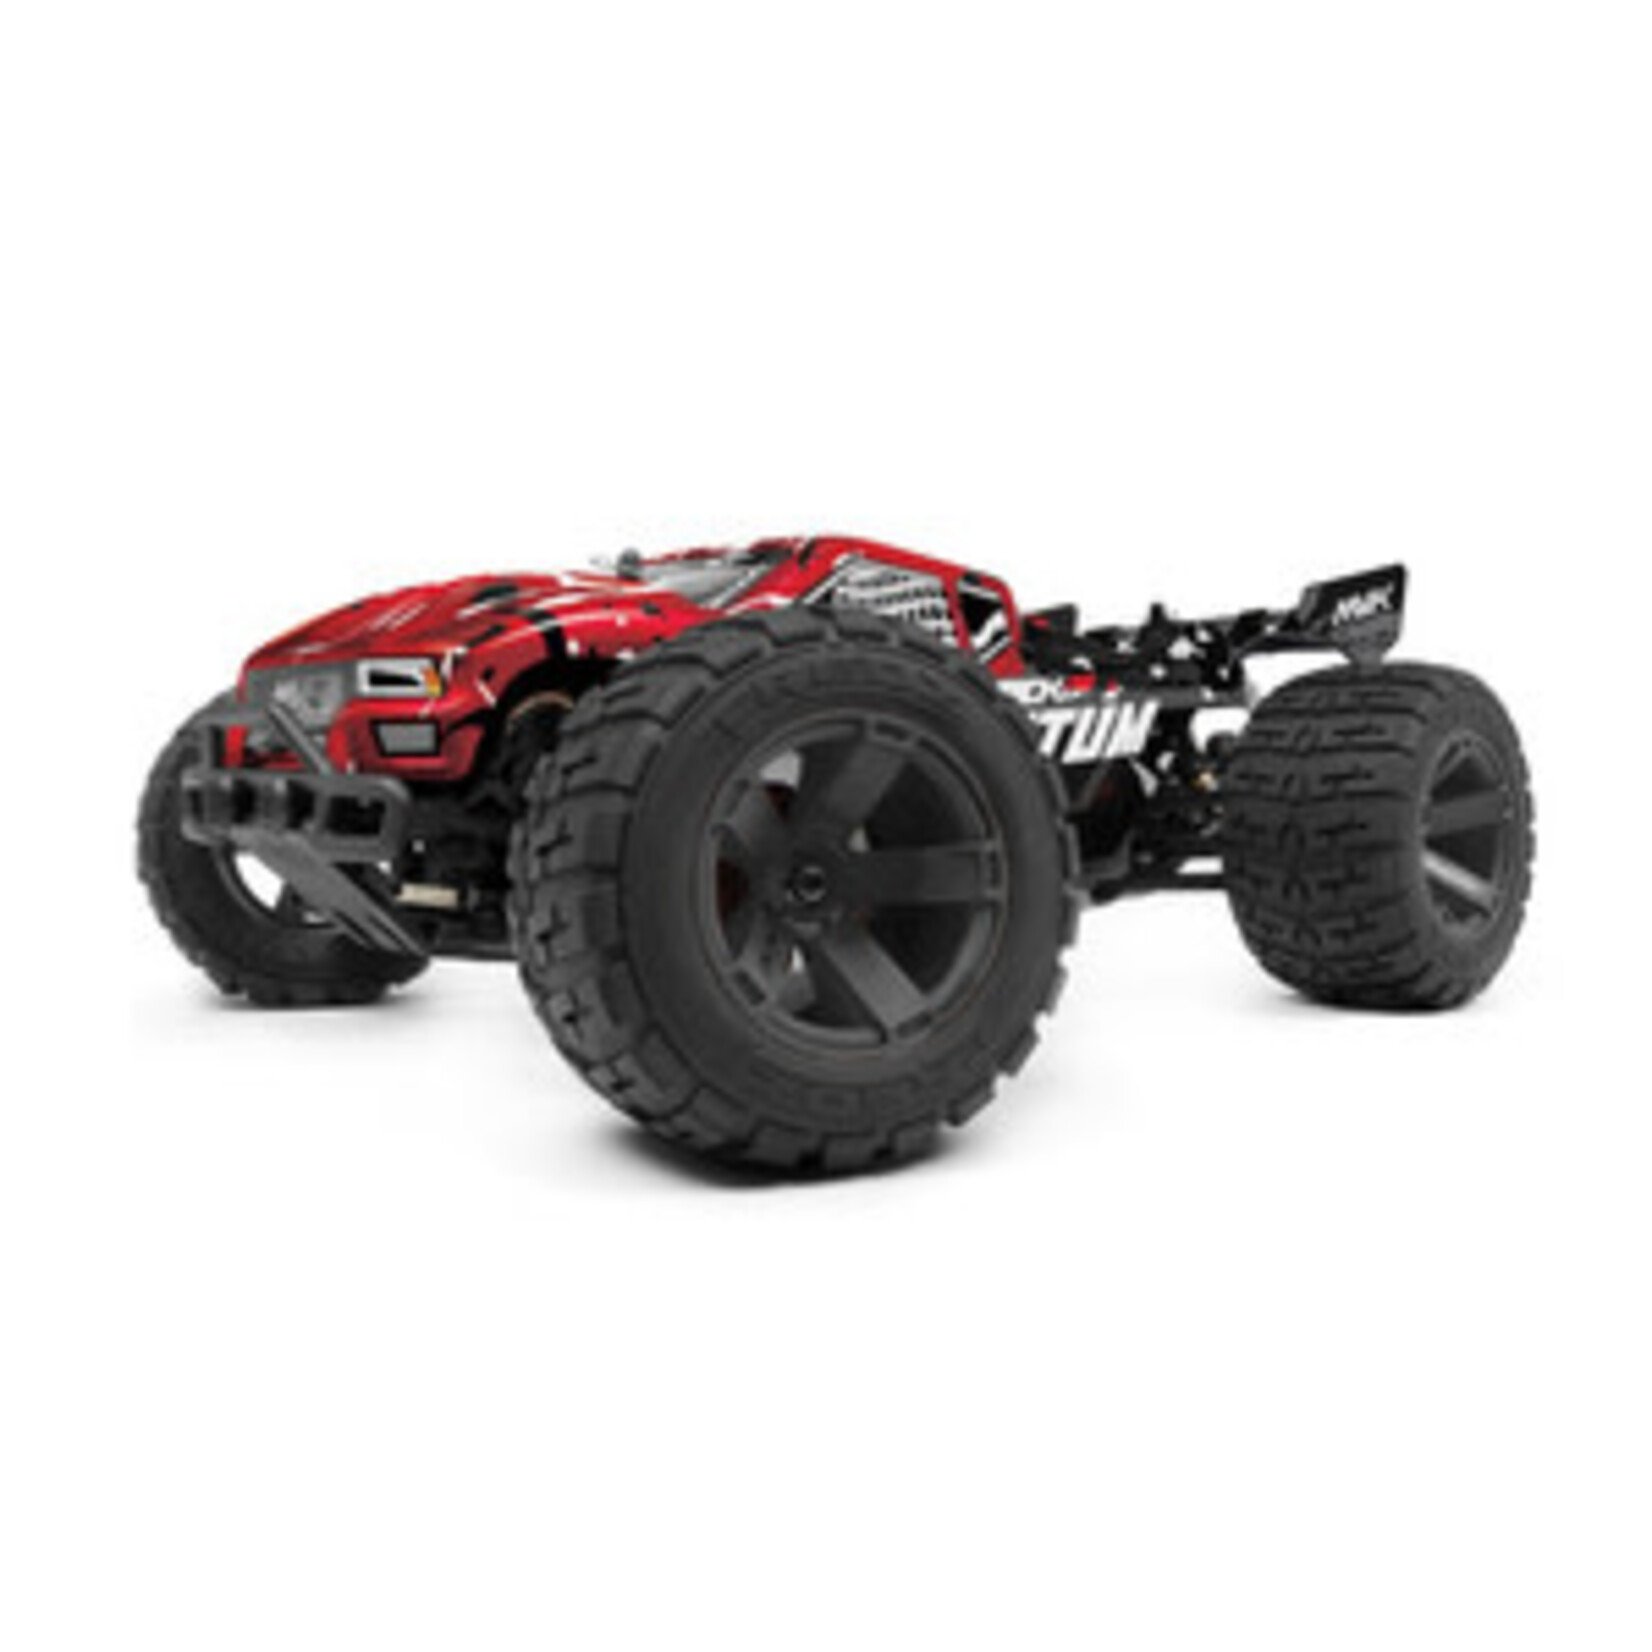 Maverick MVK150107  Quantum XT 1/10 4WD Brushed Stadium Truck, Ready To Run w/Battery & Charger - Red